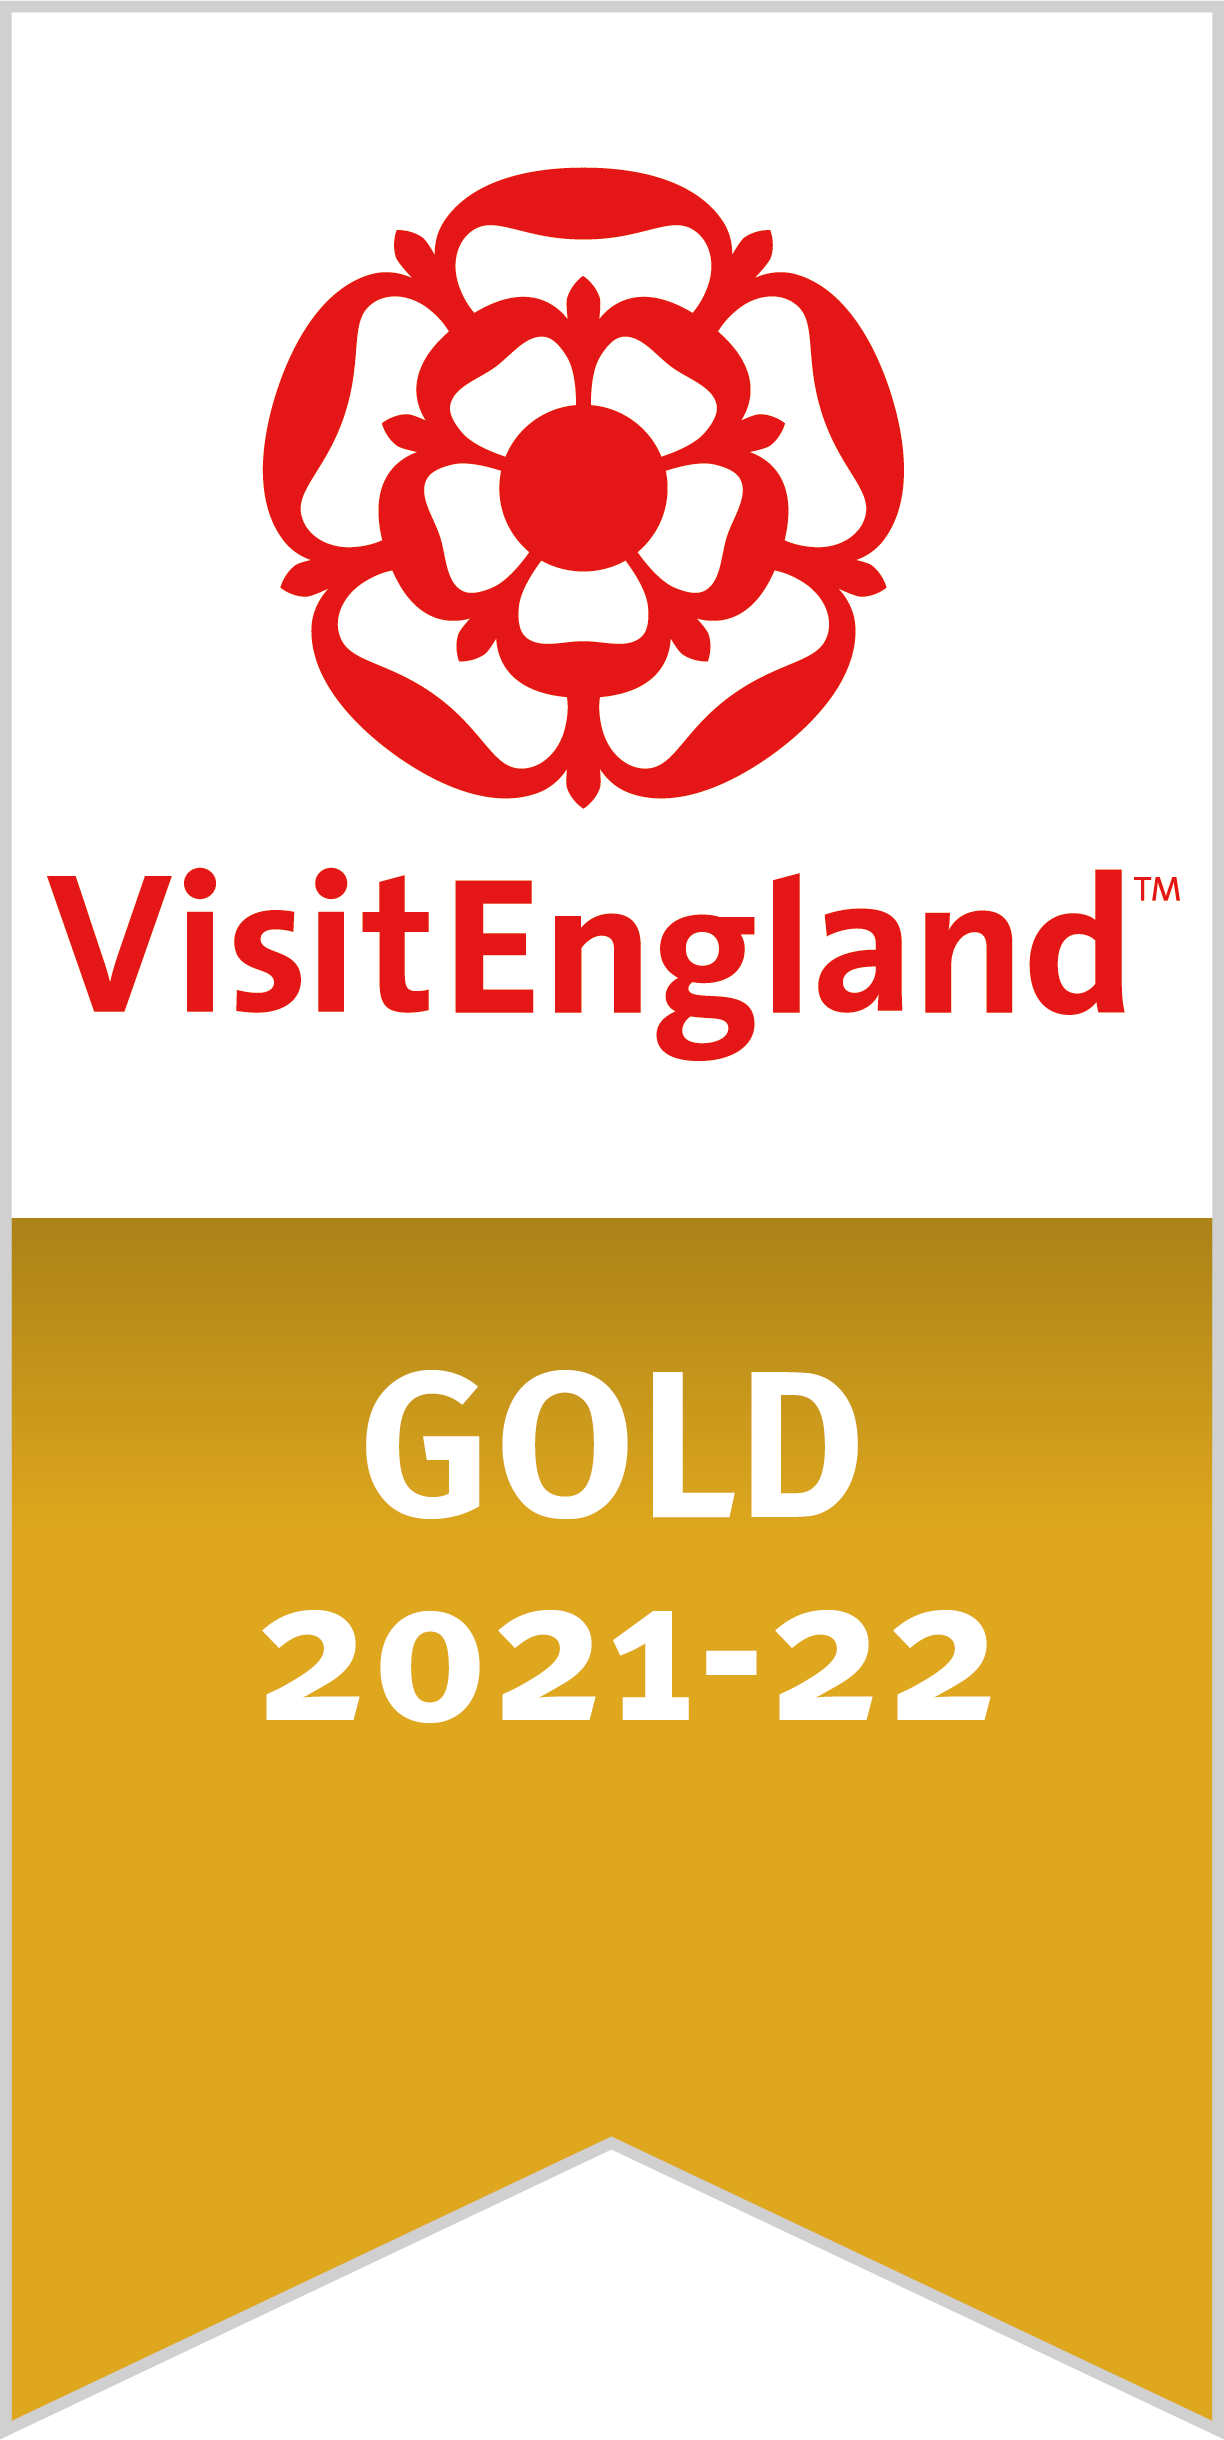 Quality Assured Visitor Attraction